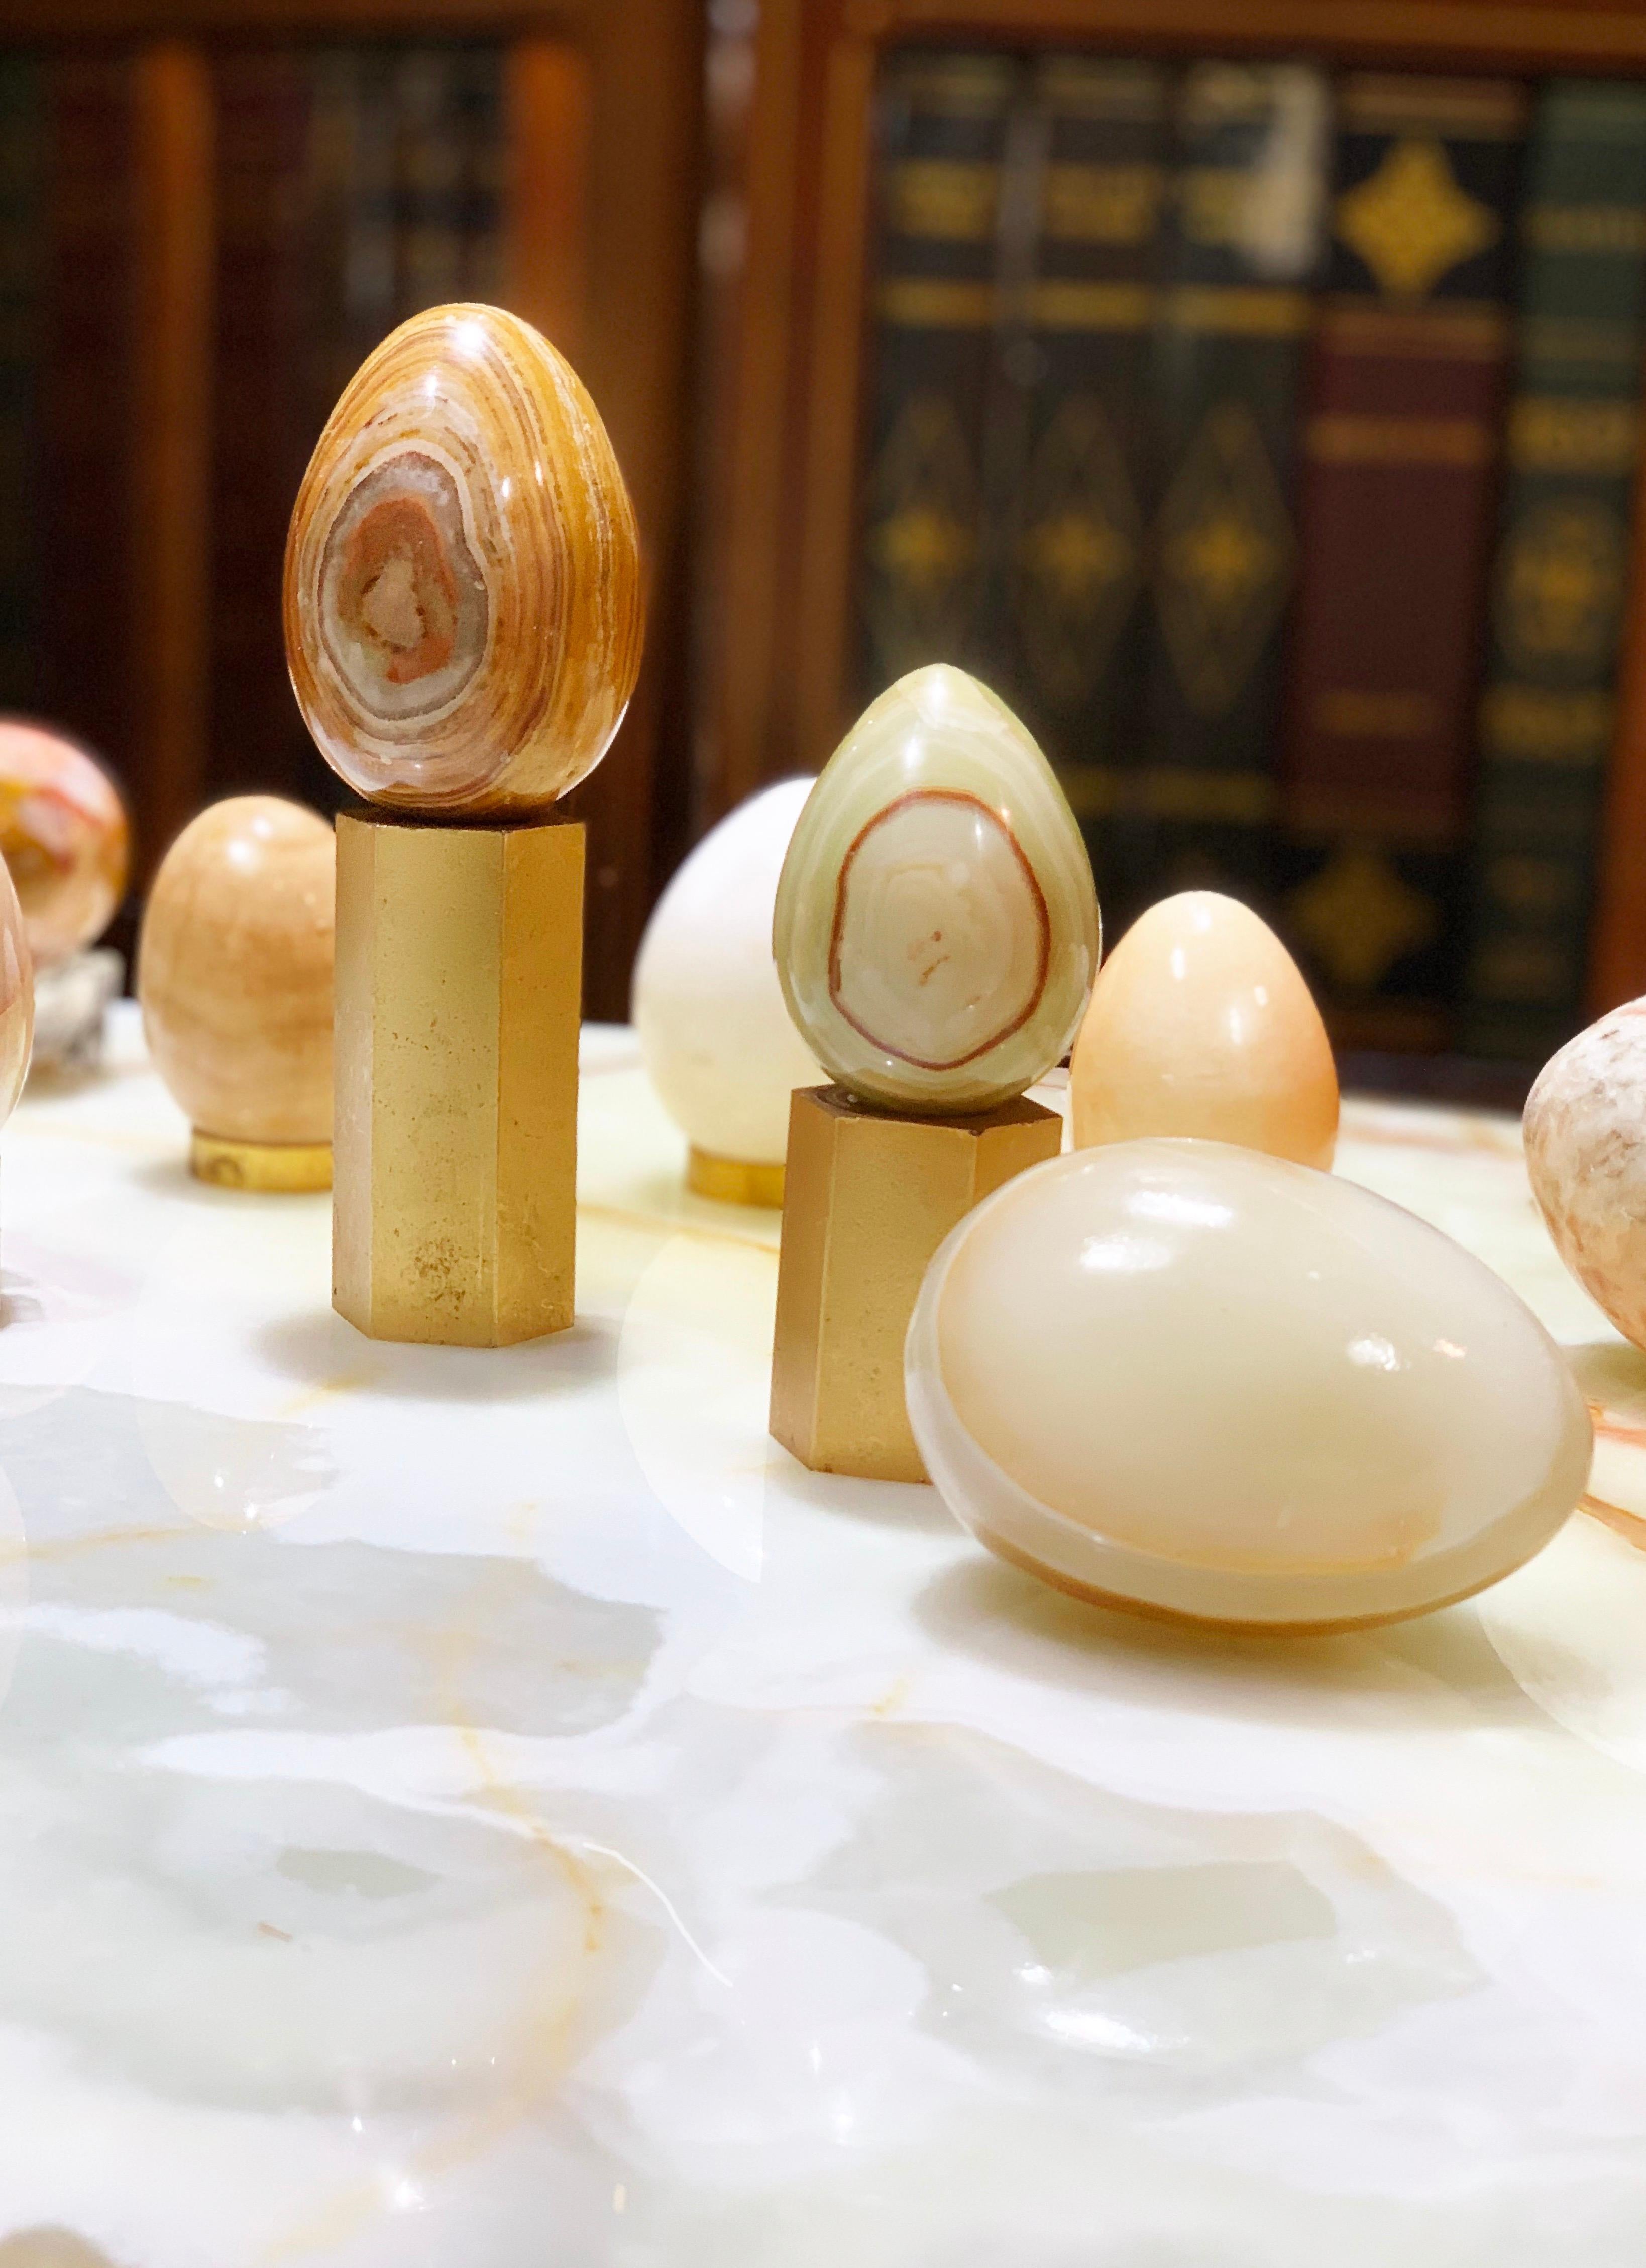 Organic modern hand carved stone egg sculptural set with Heavy guilt brass bases. Gorgeous three egg set, veined to perfection by Mother Nature and hand-burnished by mid-century artisans. 2 Hexagonal solid gilt brass bases included with three eggs